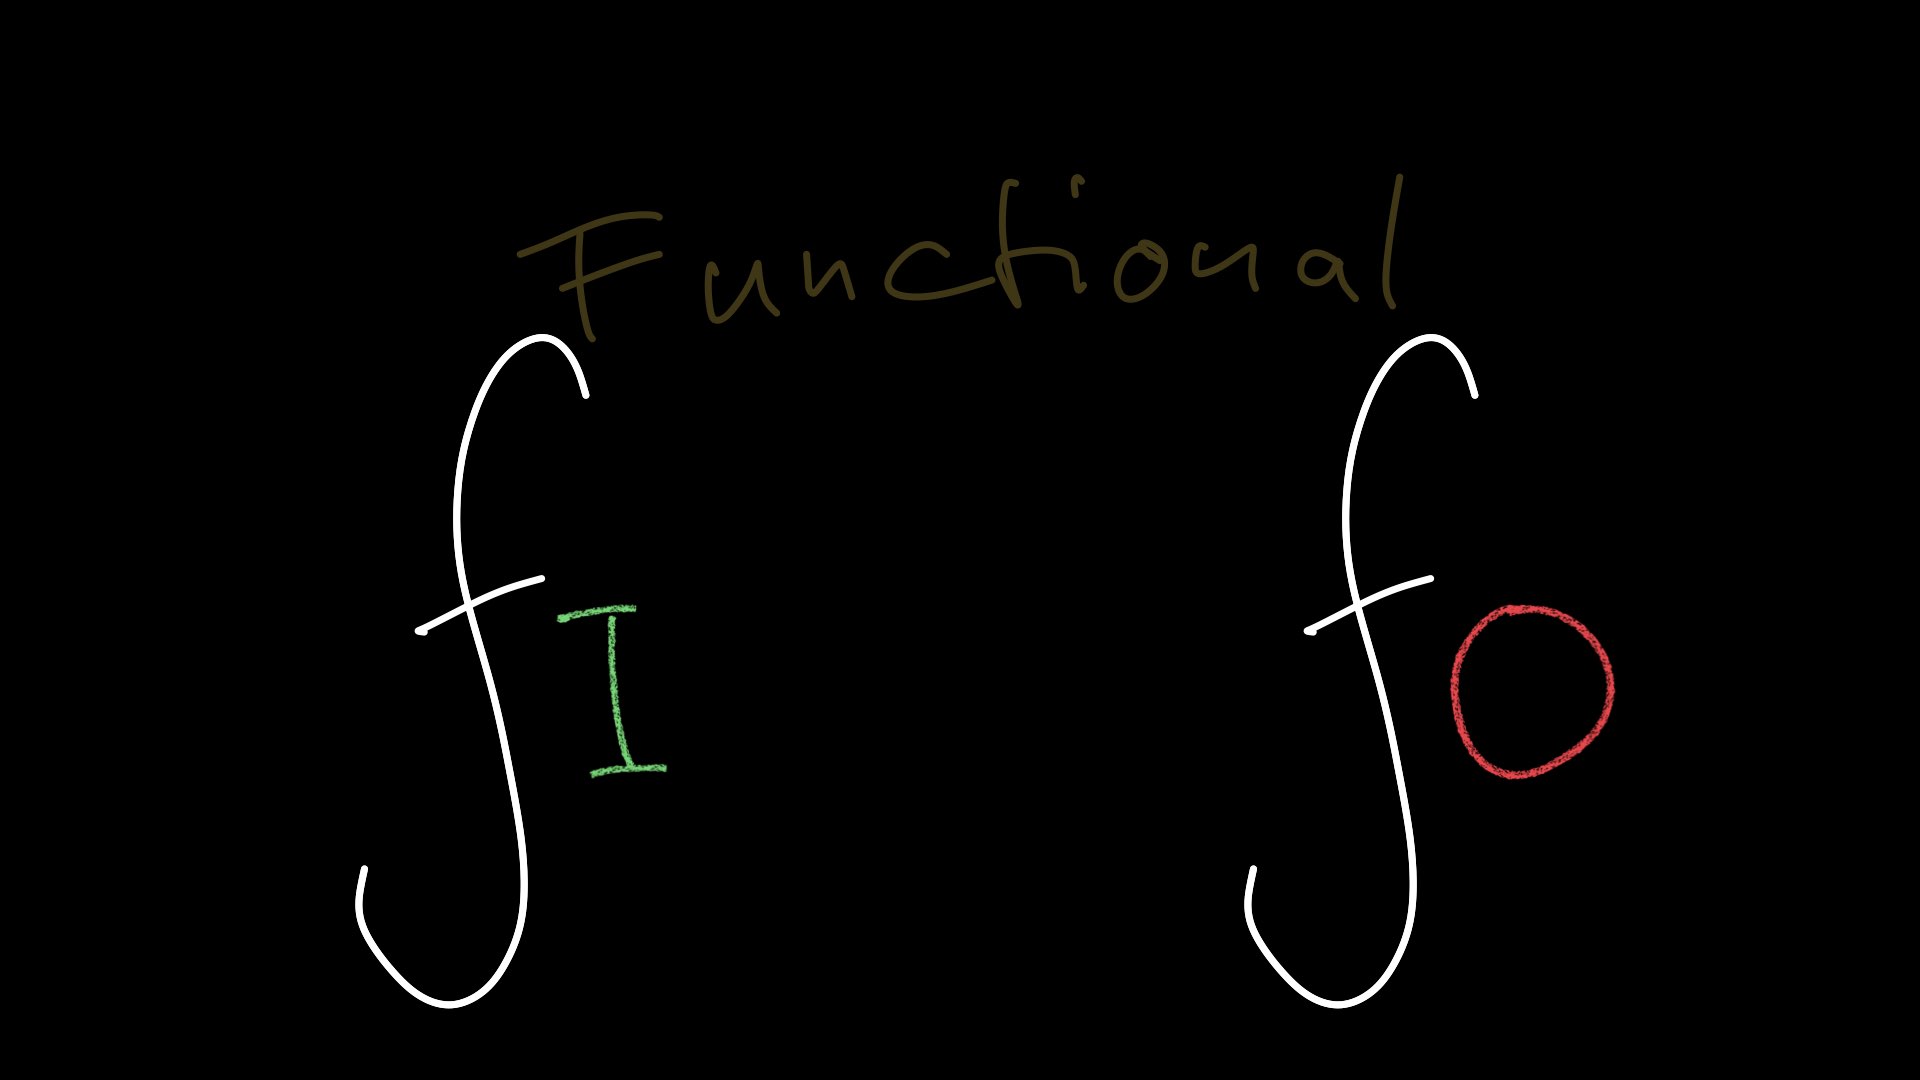 Function for Input, Function for Output